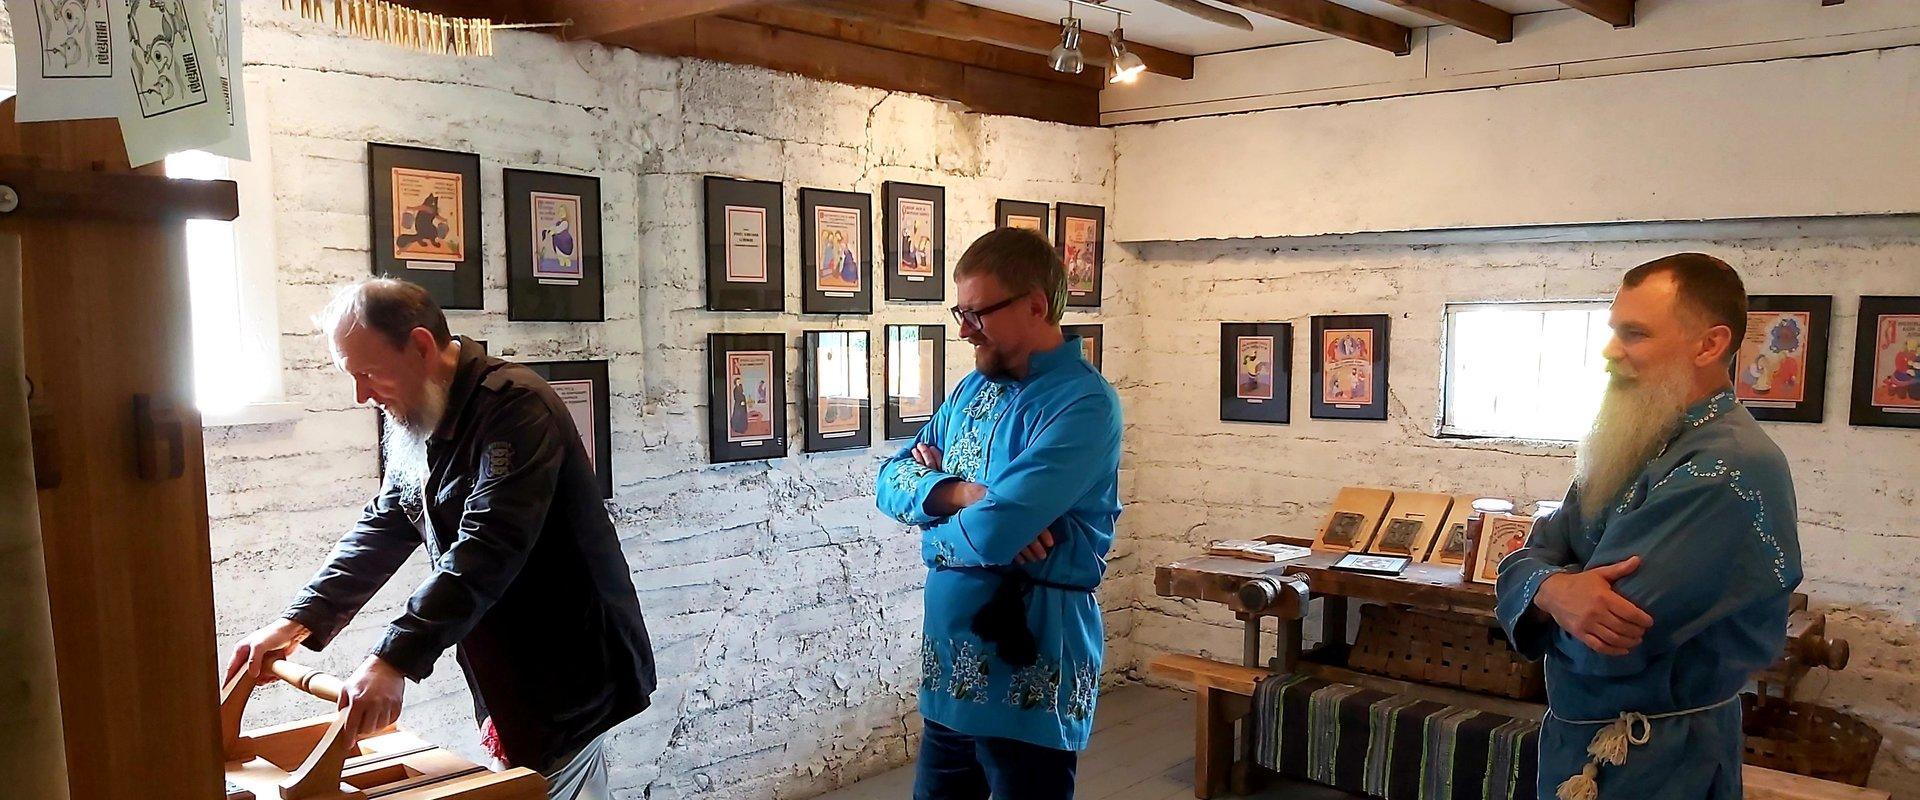 In the lubok yard (small exhibition hall, studio) with lubok master Pavel Varunin